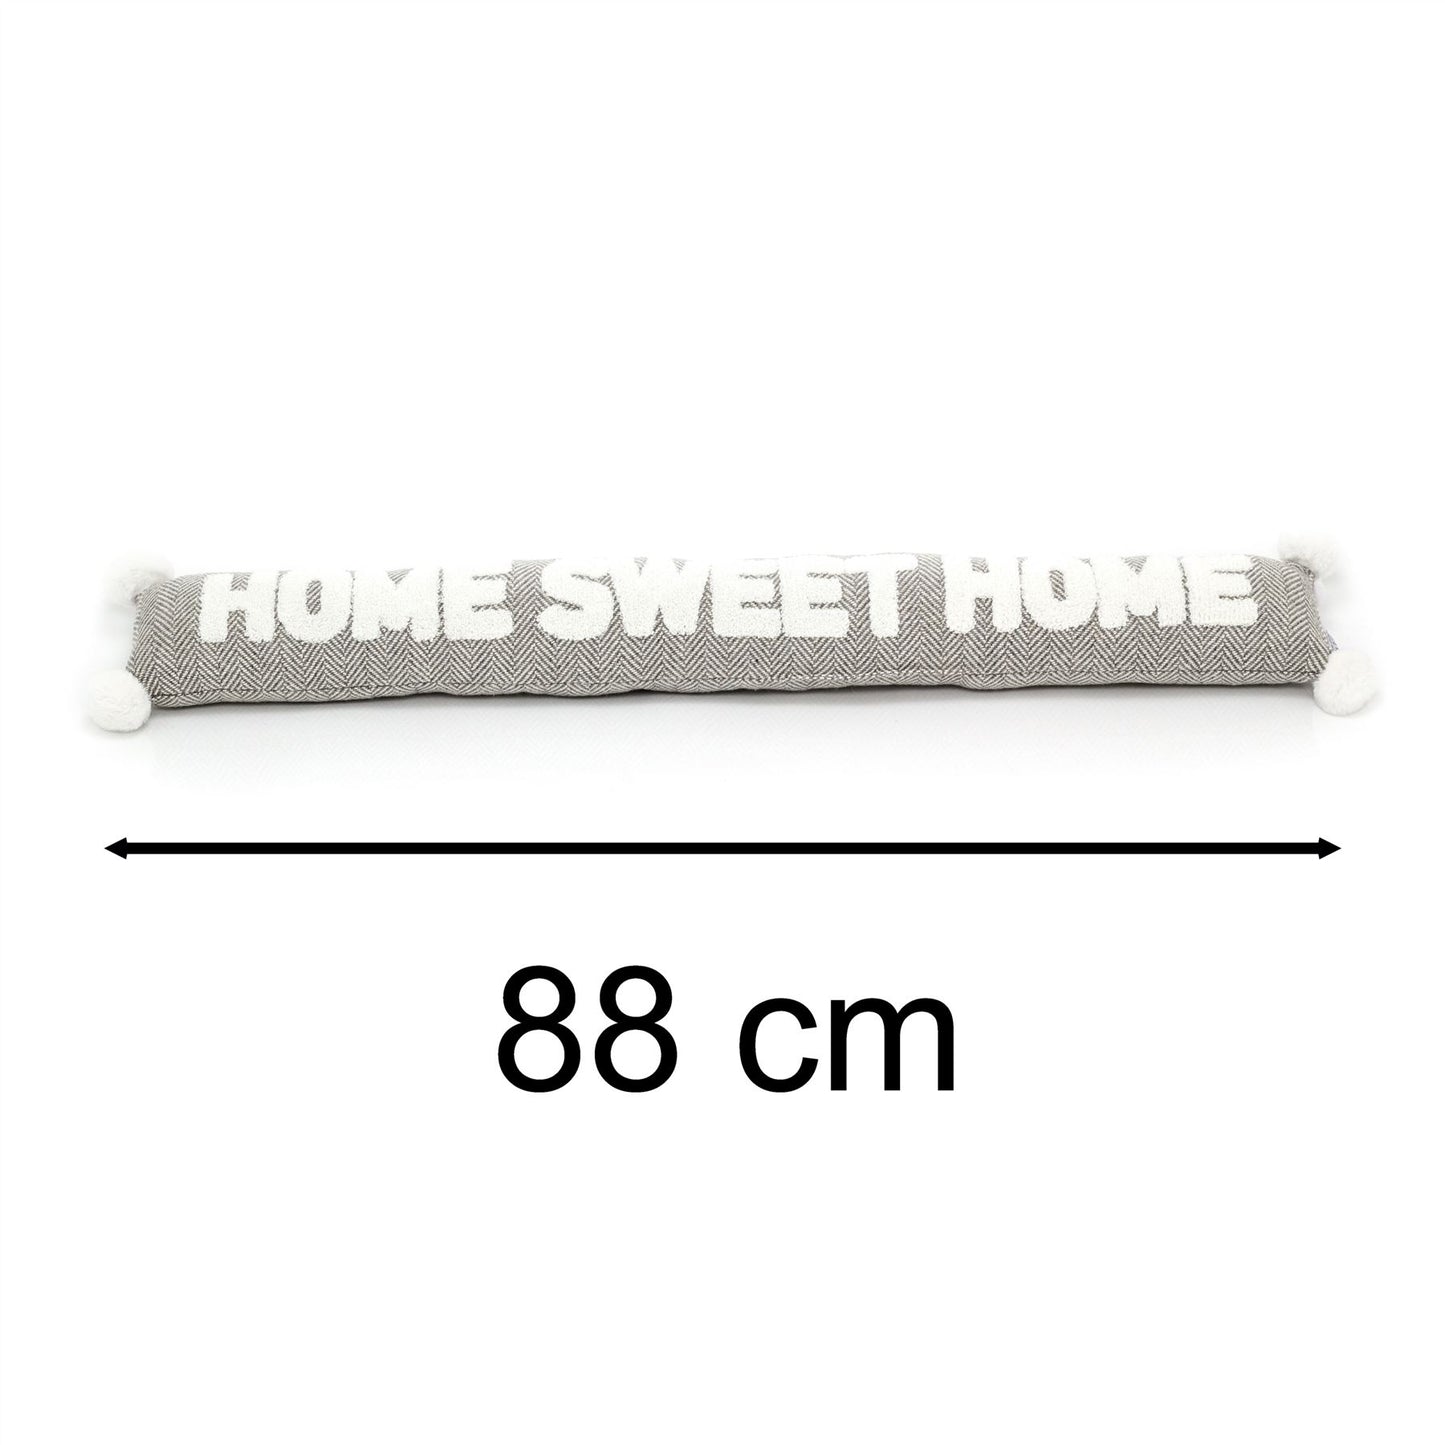 Home Sweet Home Fabric Draught Excluder | Grey Draft Excluder Door Cushion